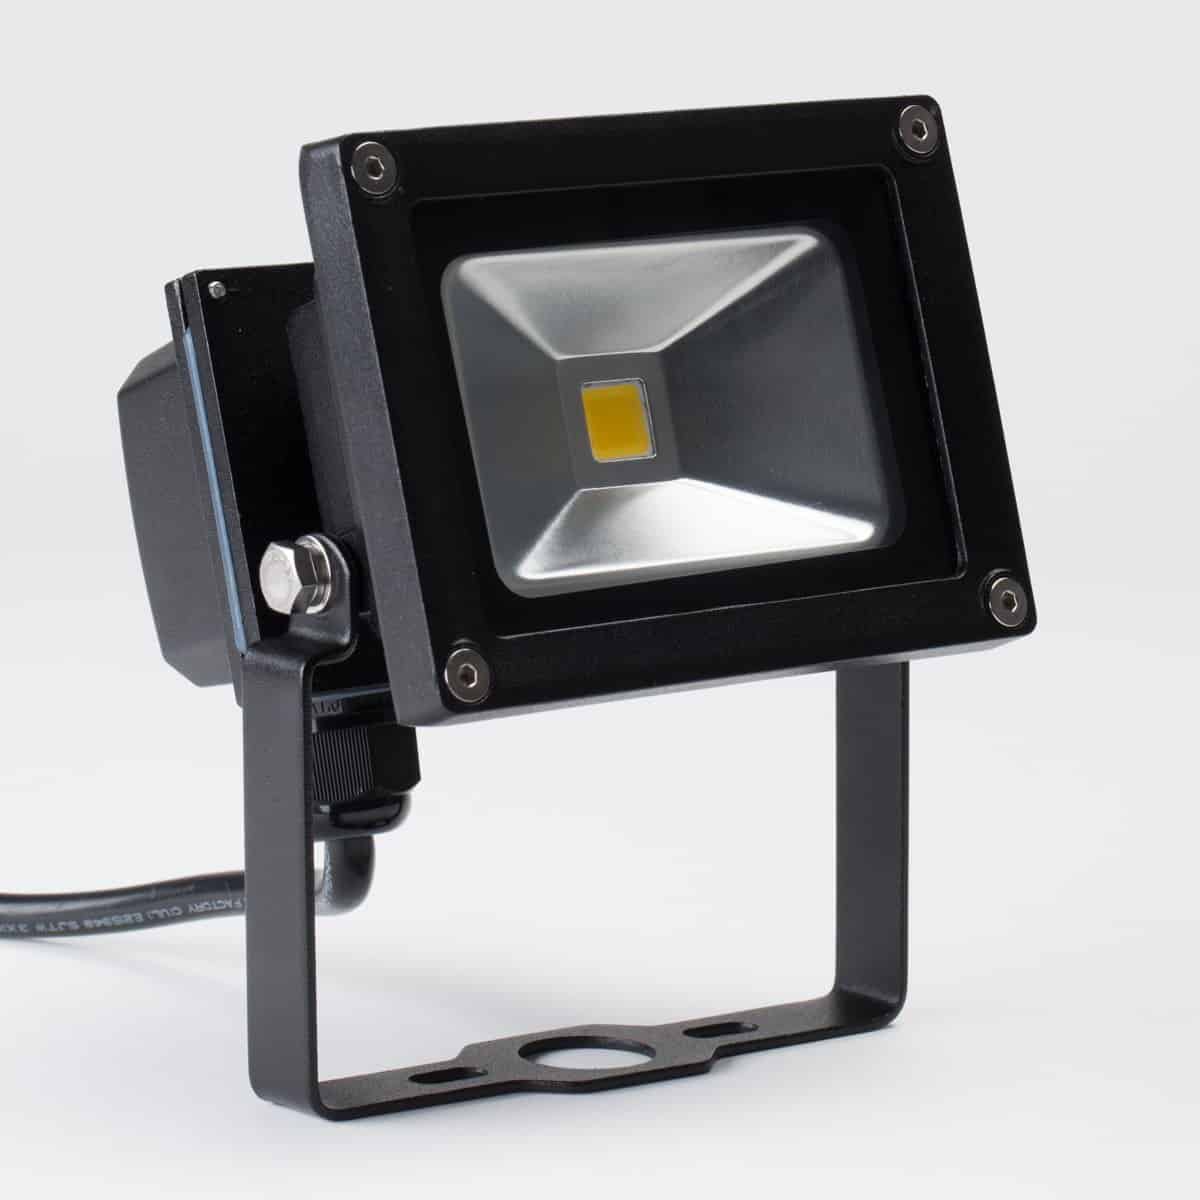 small led flood light in black housing with mounting bracket and yellow chip in center